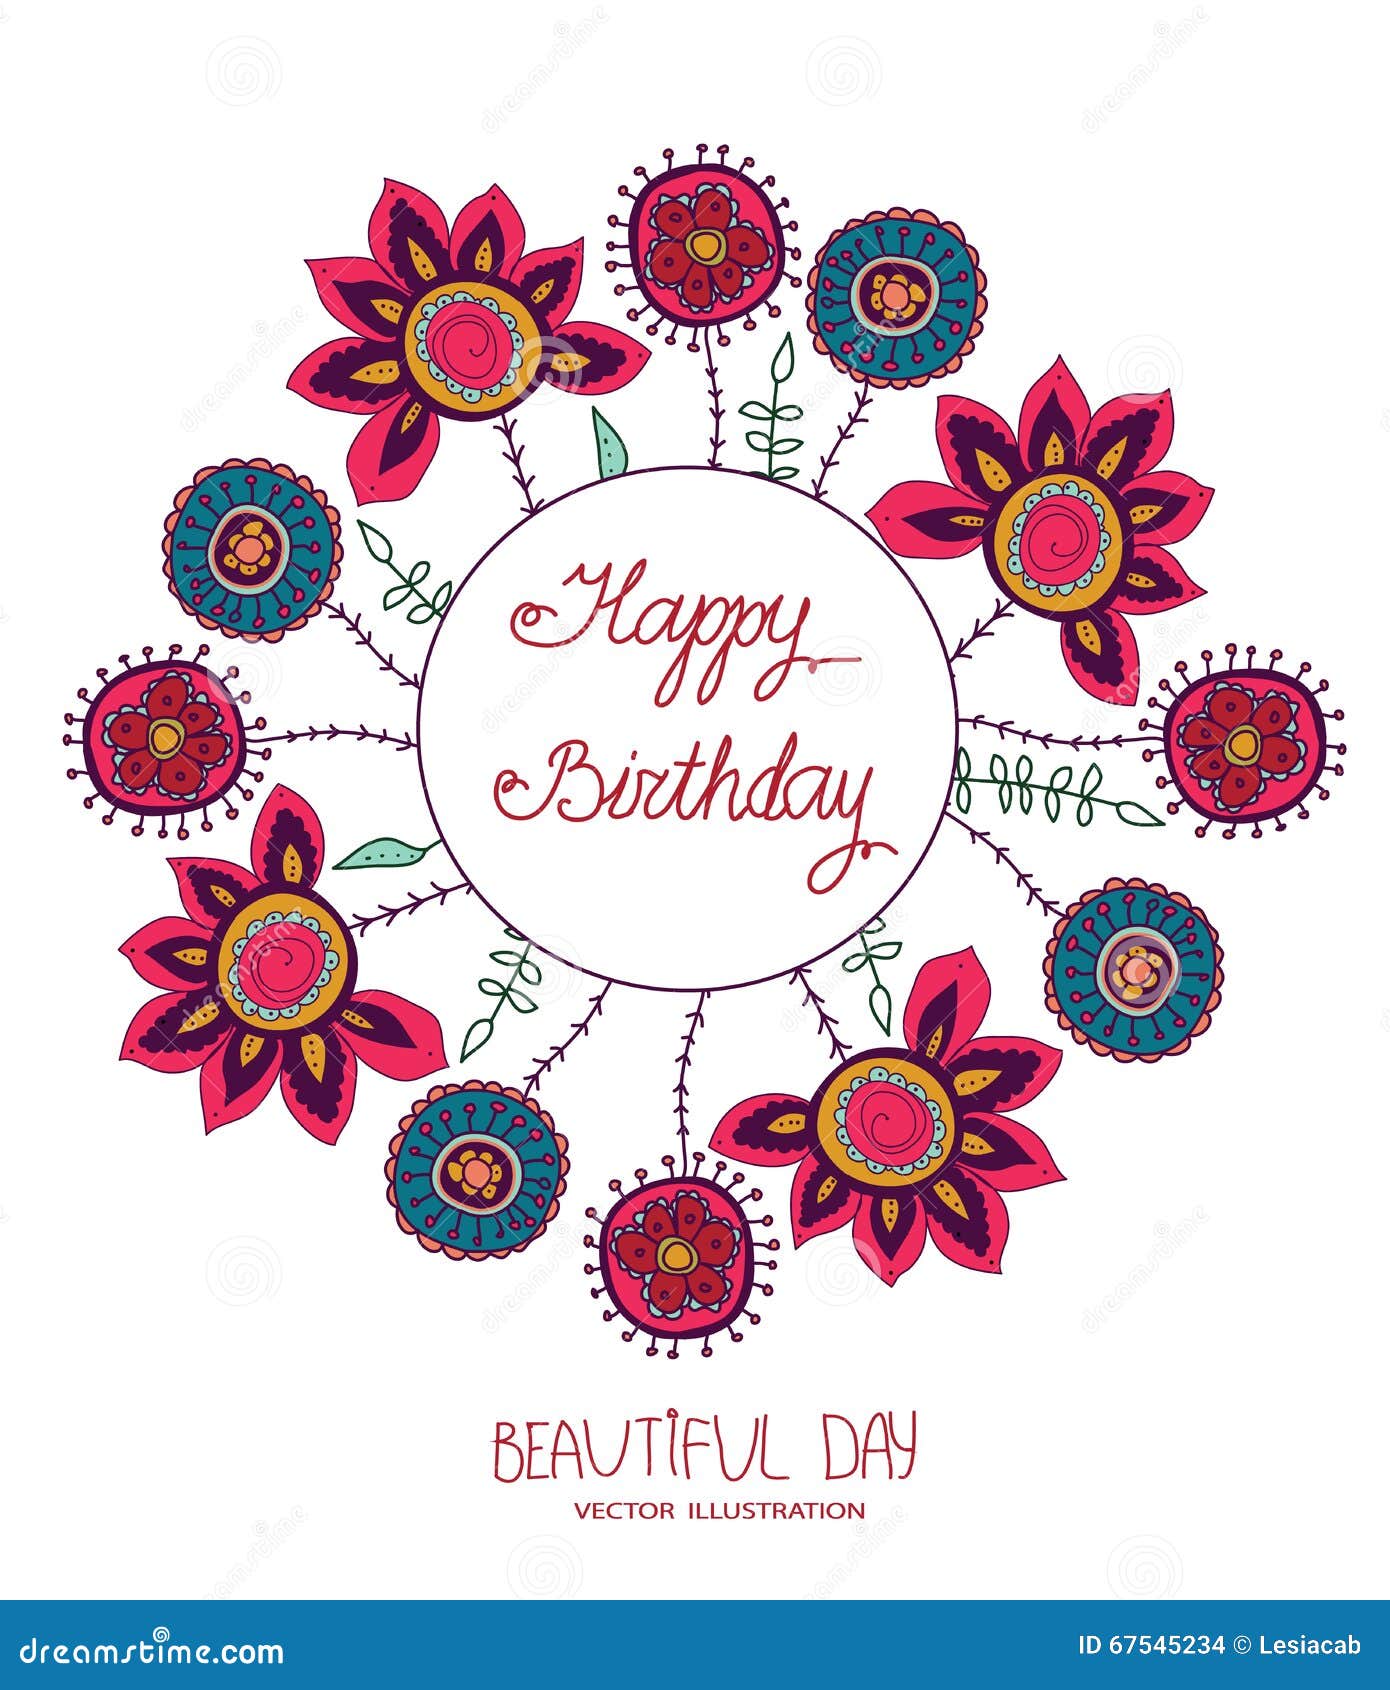 Beautiful Day and Happy Birthday Stock Vector - Illustration of ...